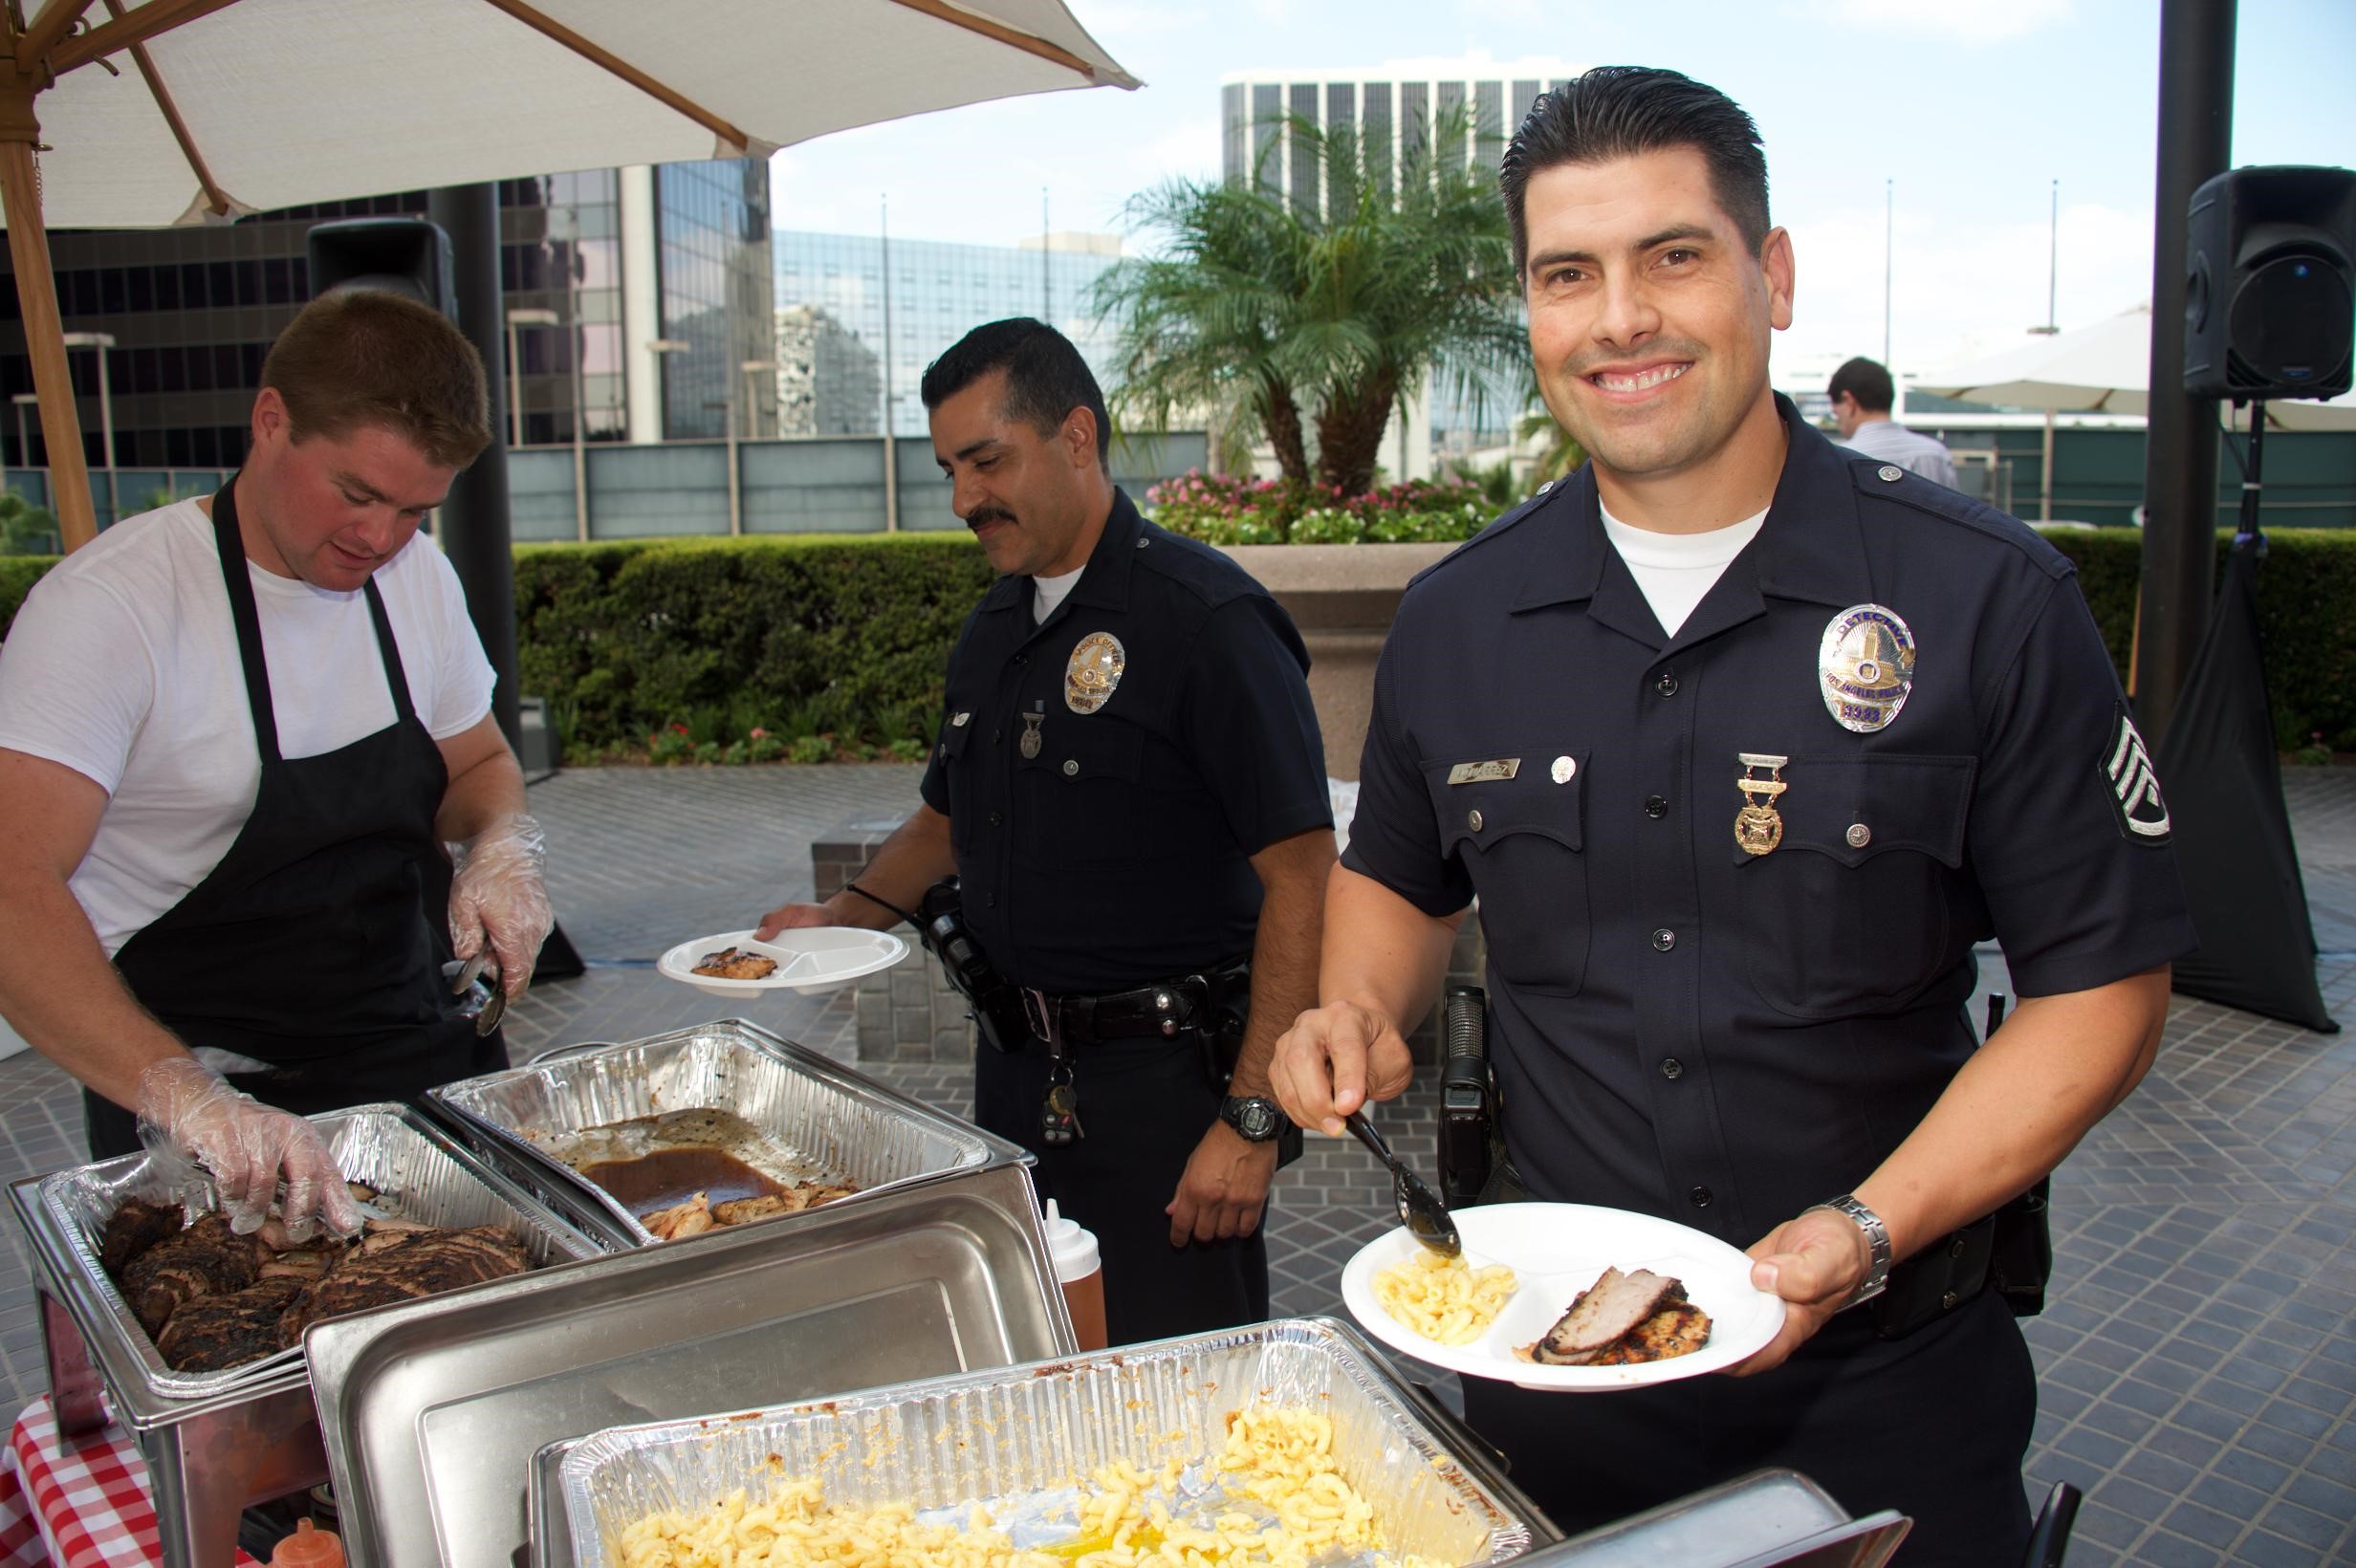 Join The 18th Annual Public Safety Appreciation BBQ In Los Angeles